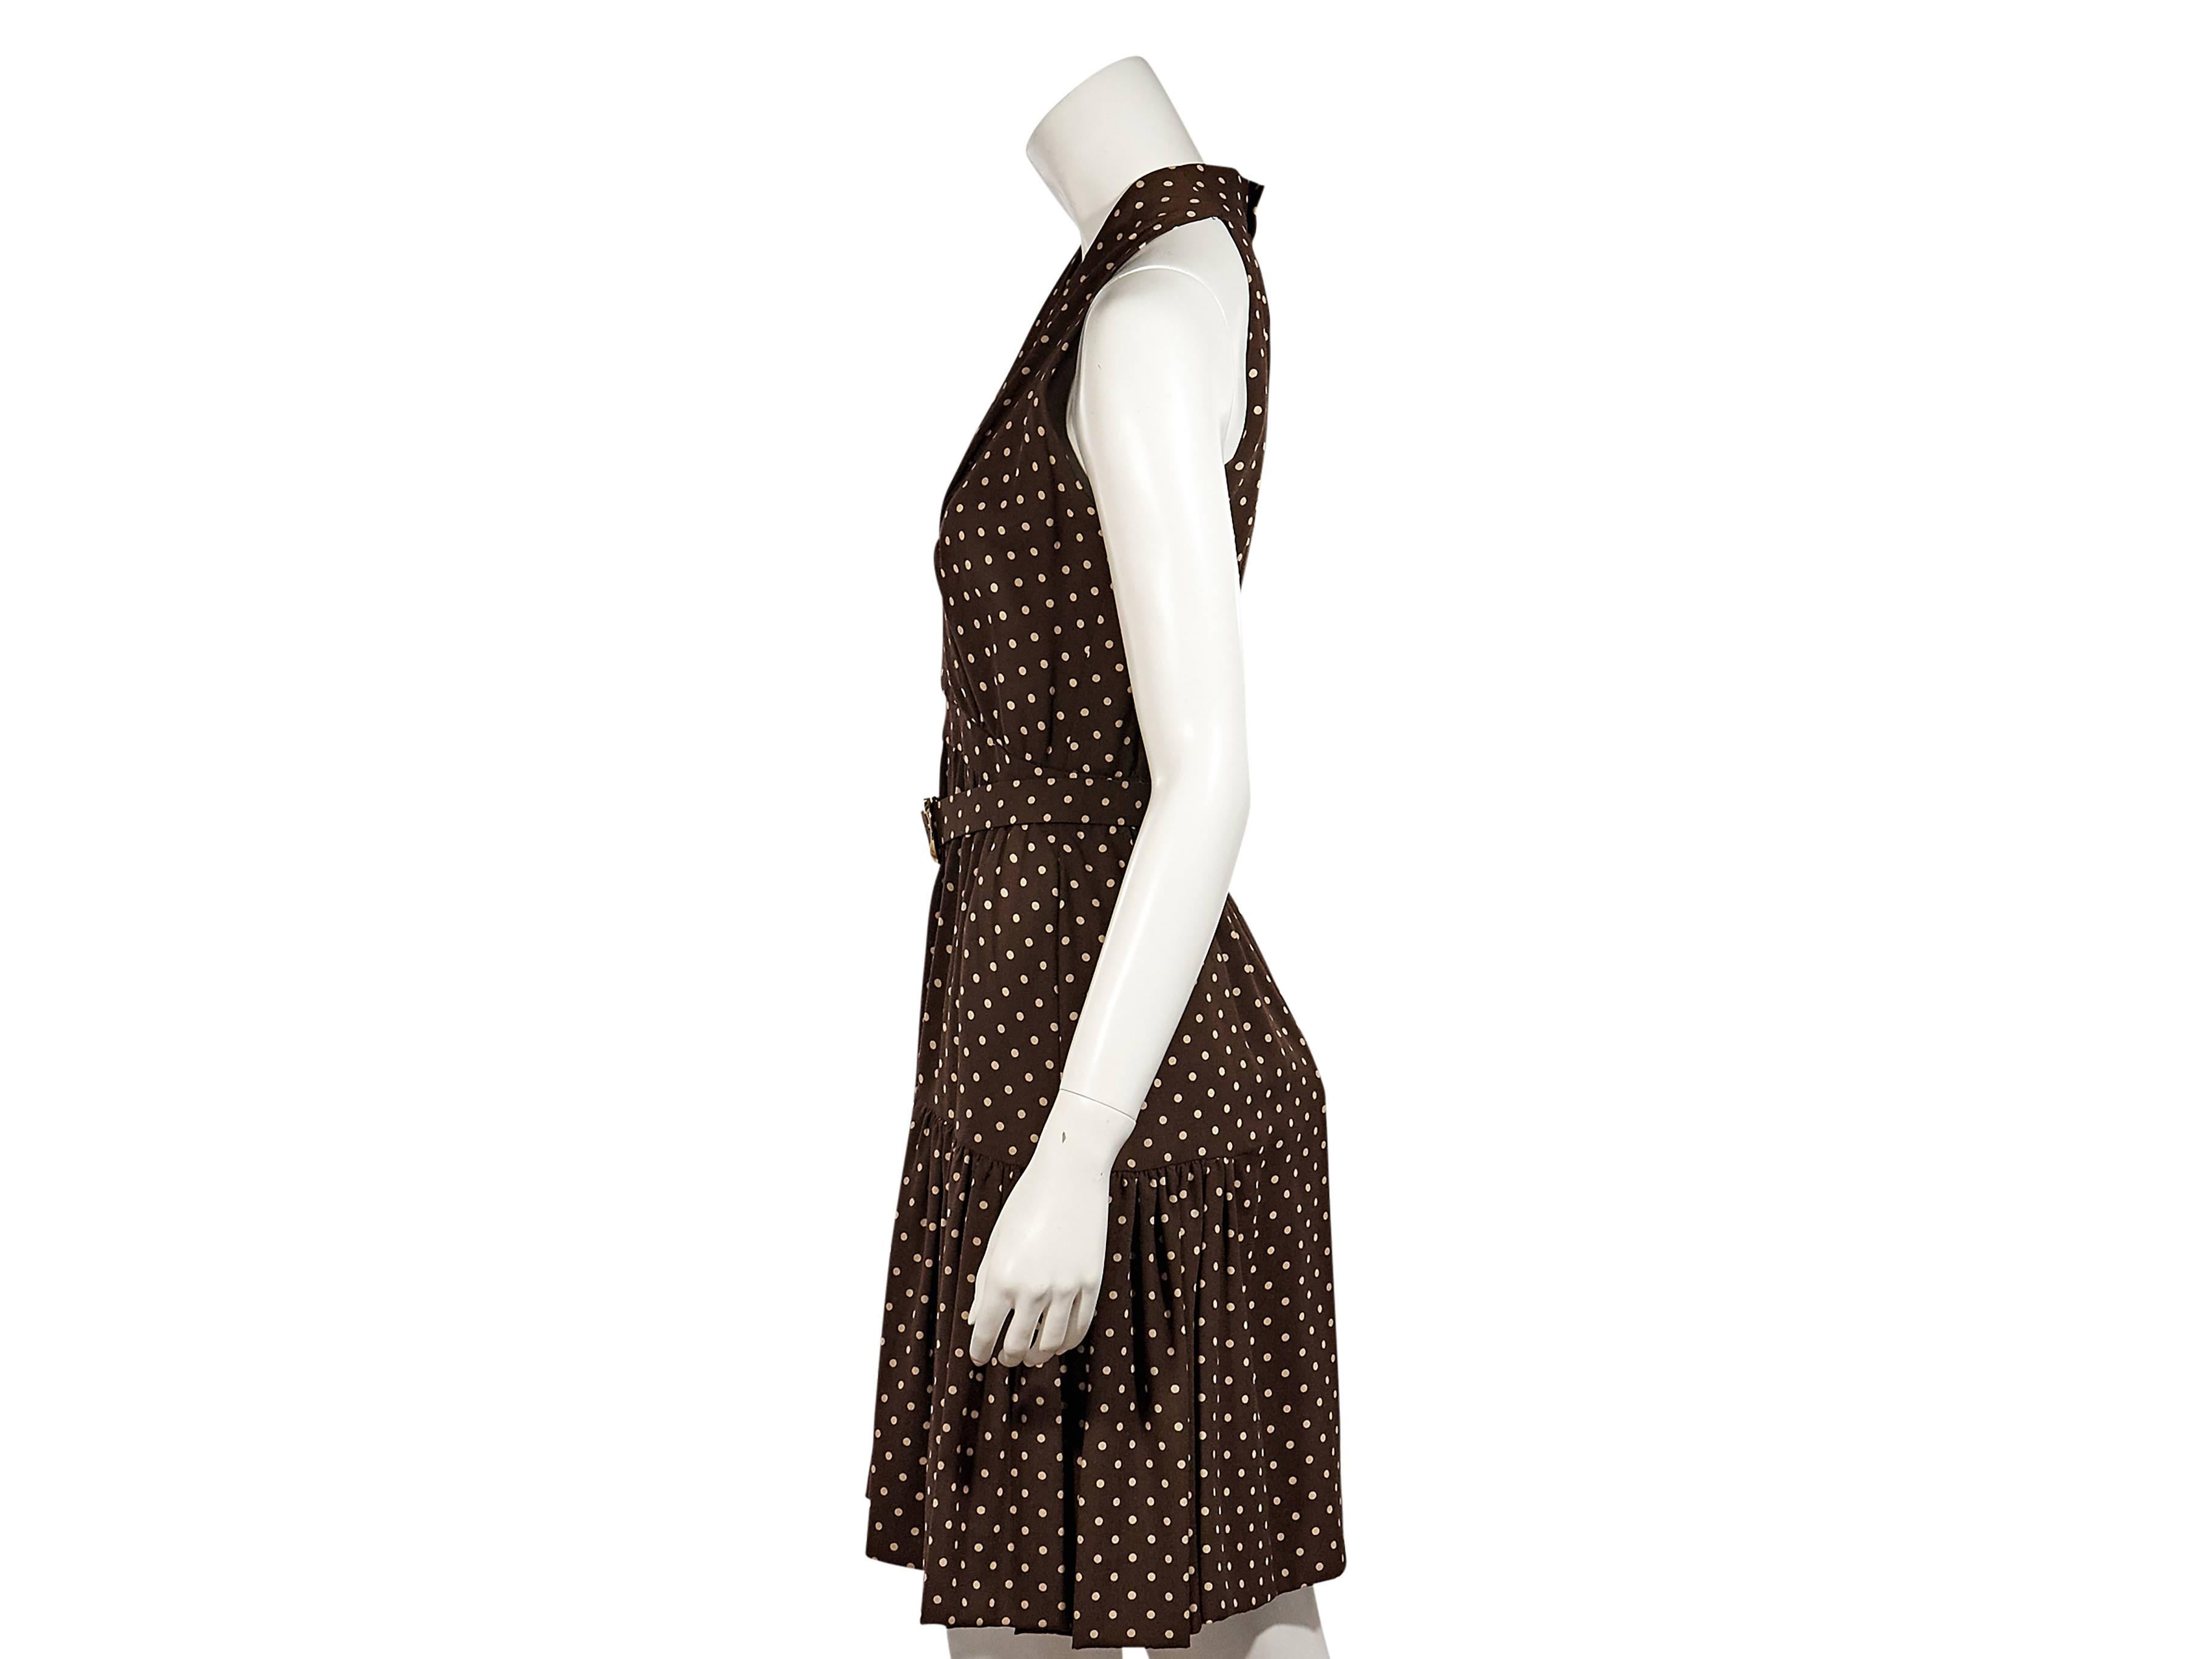 Product details:  Brown vintage polka dot dress by Chanel.  V-neck.  Sleeveless.  Adjustable belted waist.  Concealed back zip closure with double buttons.  Back slit.  
Condition: Excellent. 
Est. Retail $ 1,498.00